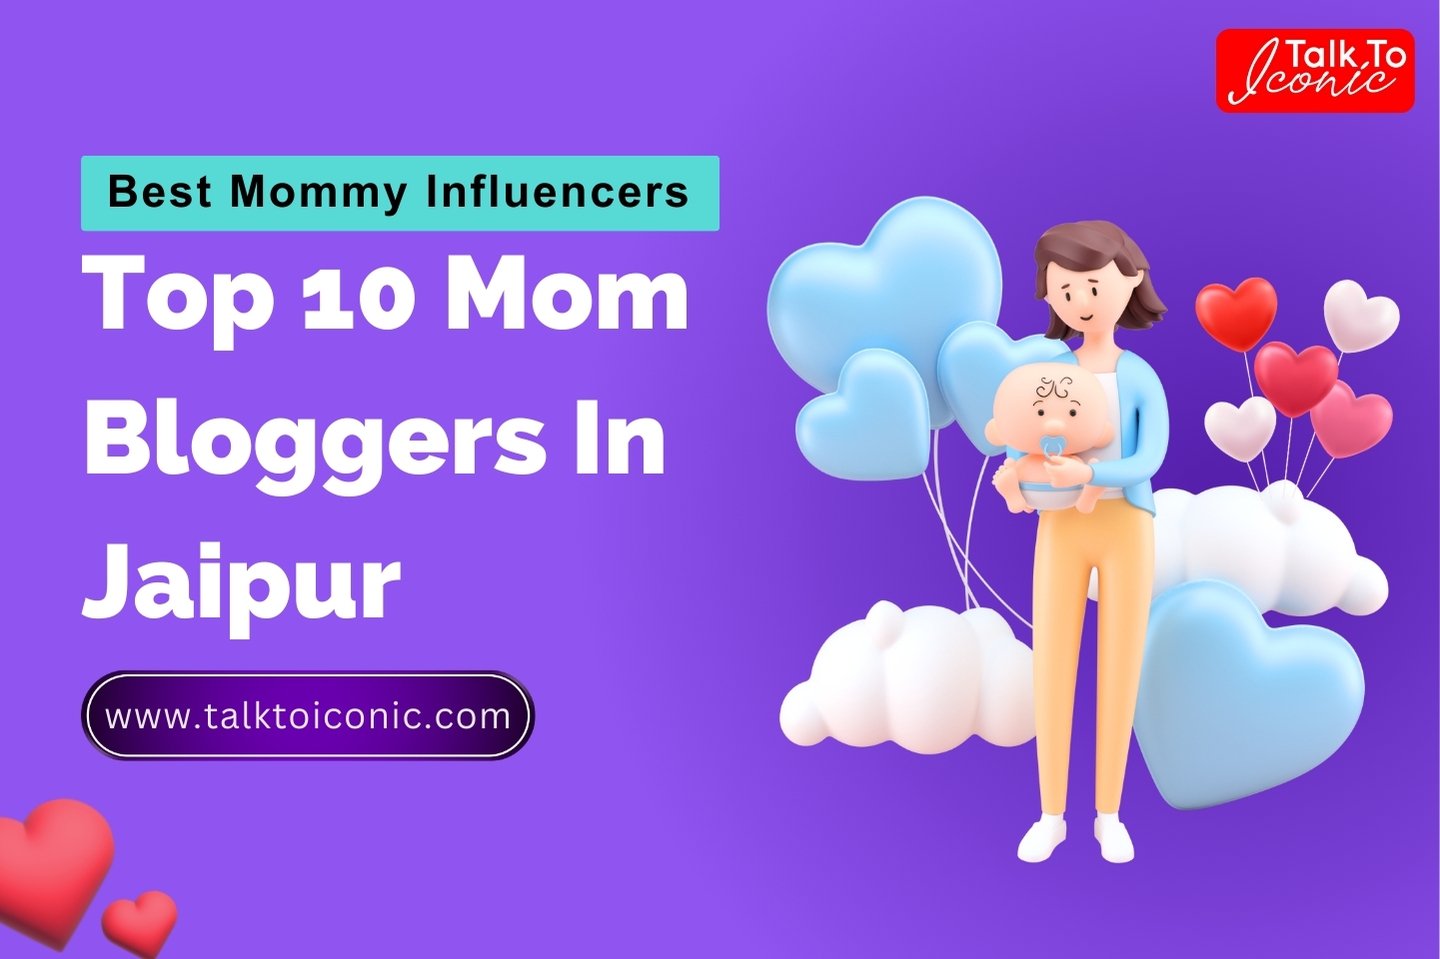 Top 10 Mom Bloggers and Mom Influencers in Jaipur Who Are Famous on Instagram